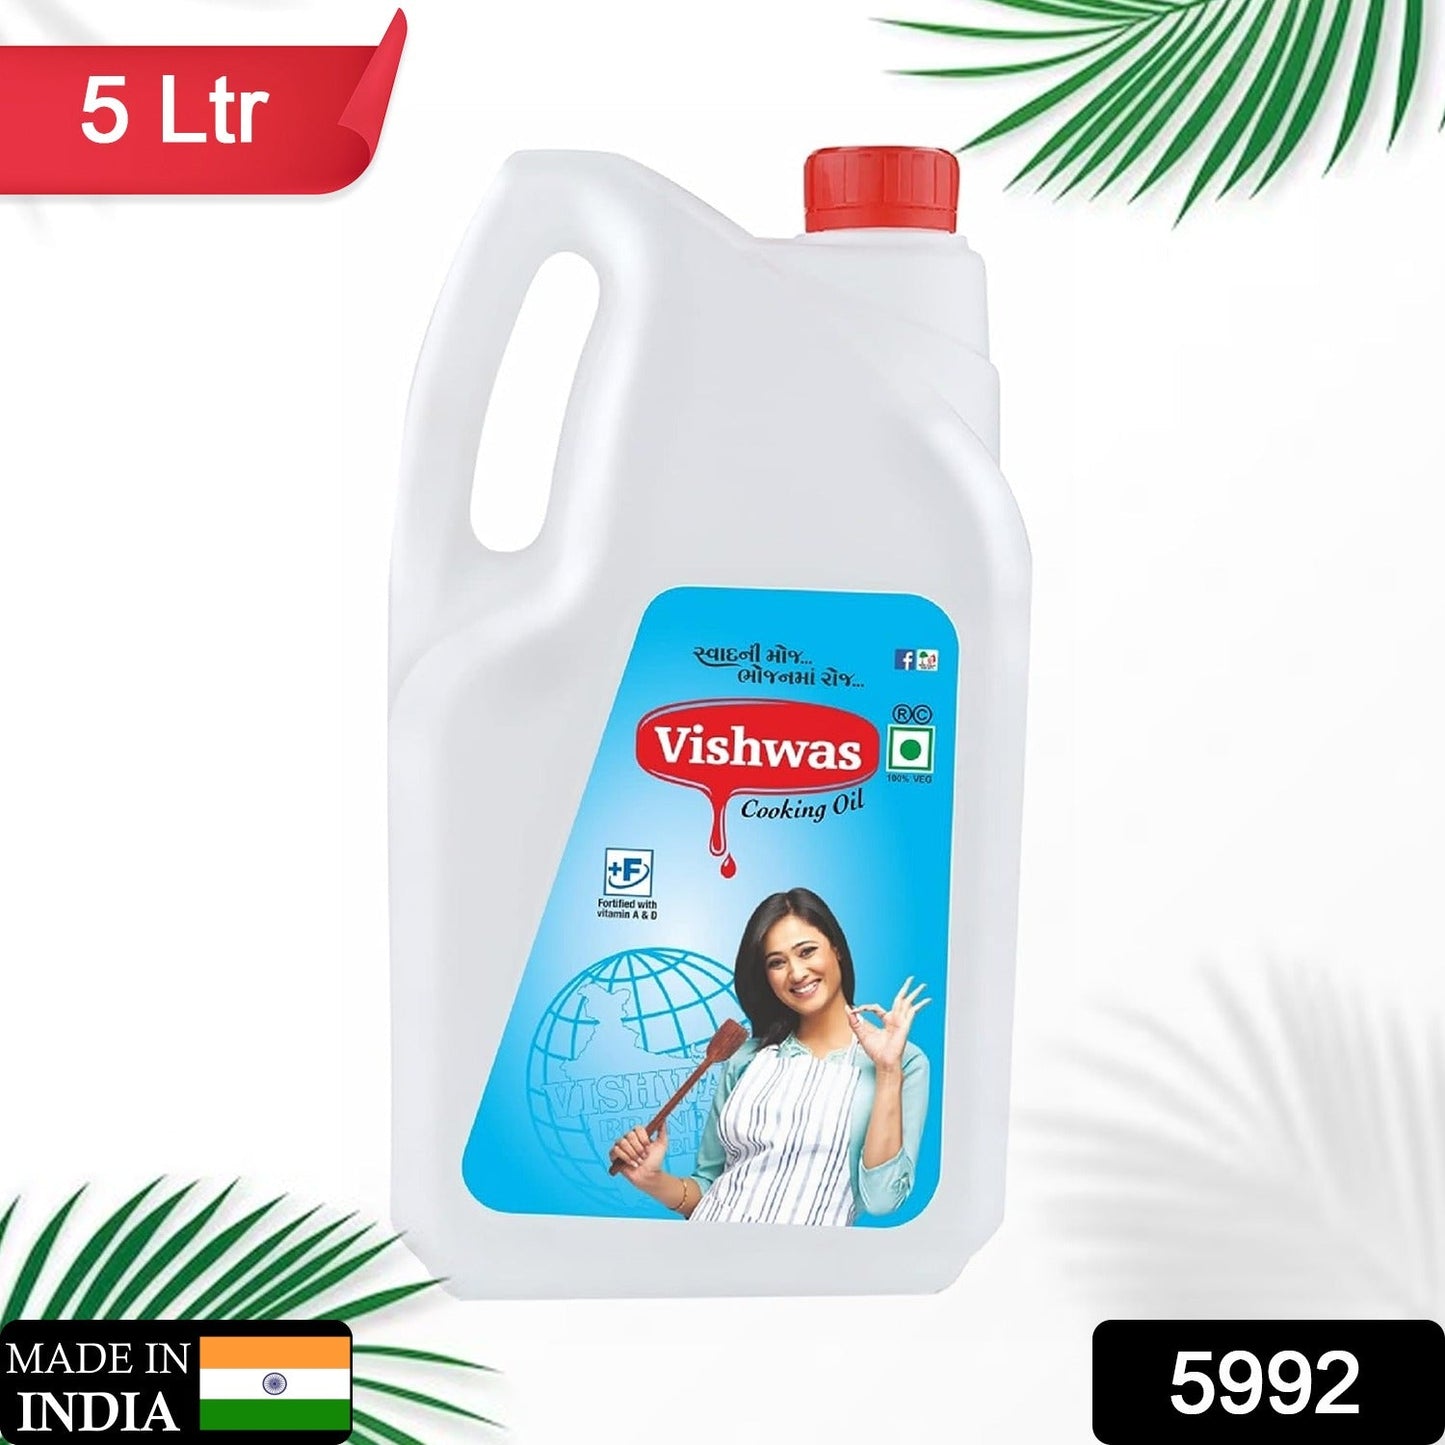 5992 Vishwas Palm Oil Jar & Pouch | Refined Palm Oil 100% Pure Palmolin Cooking Oil (5Ltr Pack)